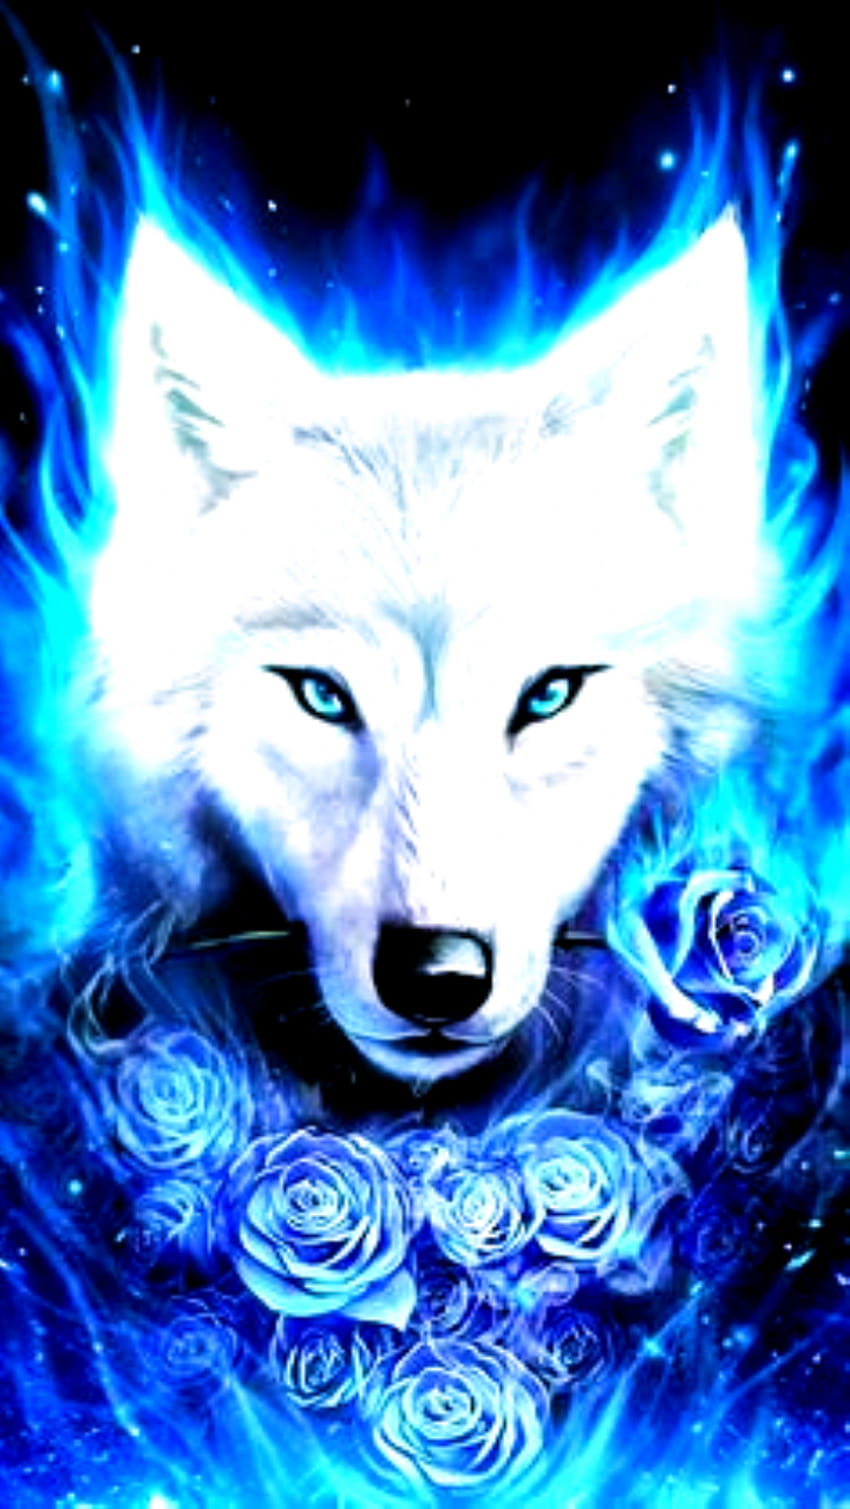 Epic Wolf Backgrounds For Iphone on Hupages, if you like it dont forget HD phone wallpaper